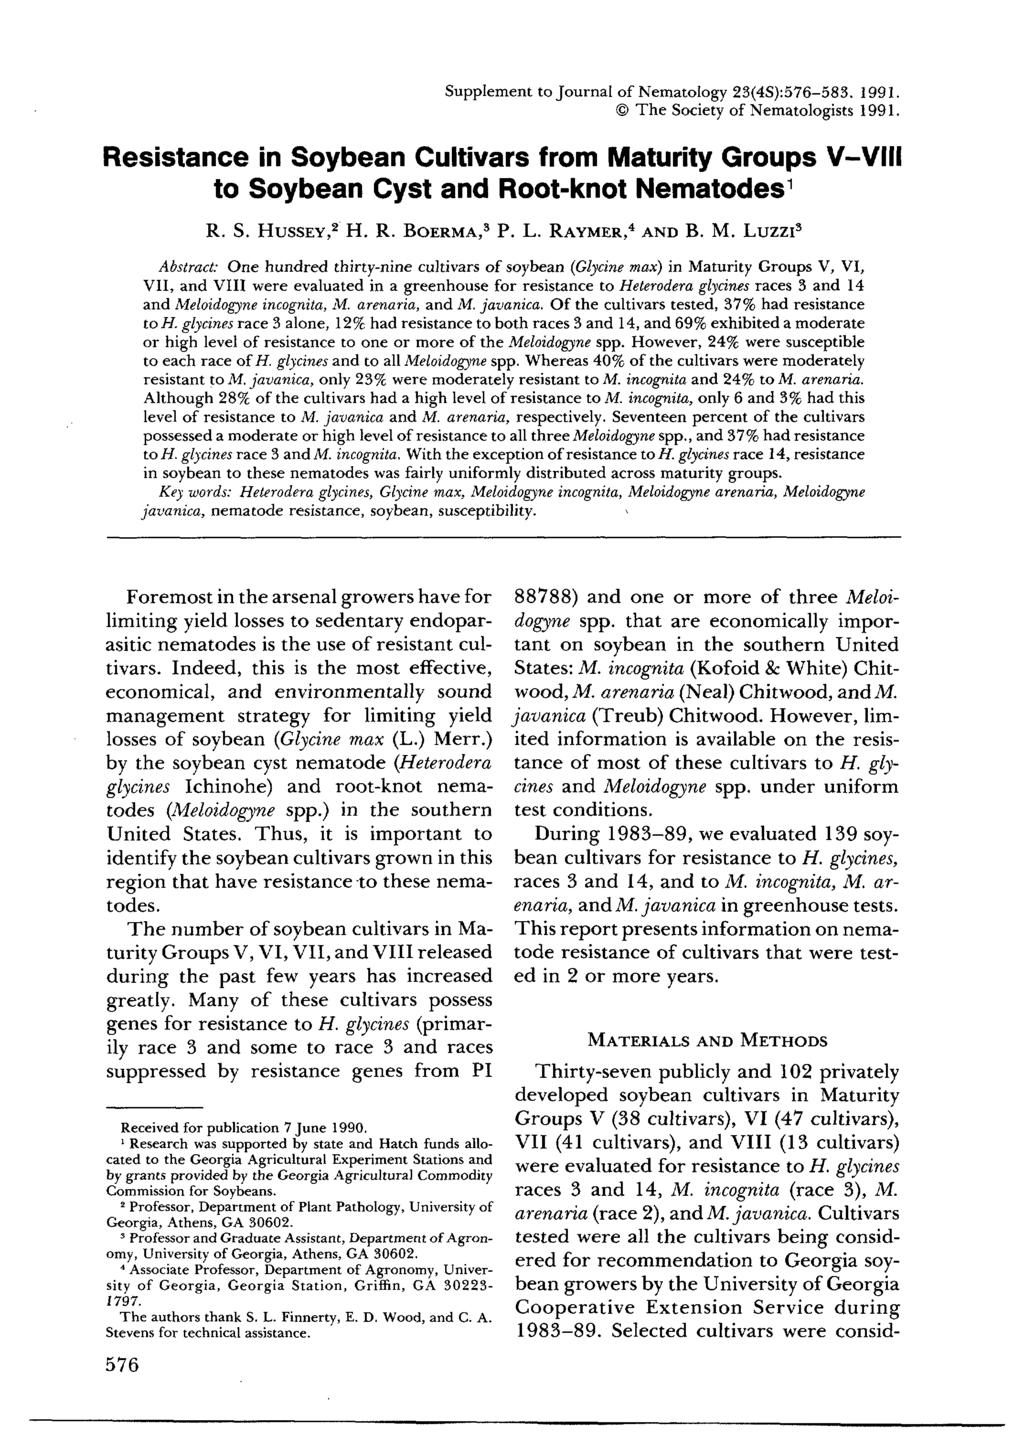 Supplement to Journal of Nematology 23(4S):576-583. 1991. The Society of Nematologists 1991. Resistance in Soybean Cultivars from Maturity Groups V-VIII to Soybean Cyst and Root-knot Nematodes 1 R. S. HUSSEY, 2 H.